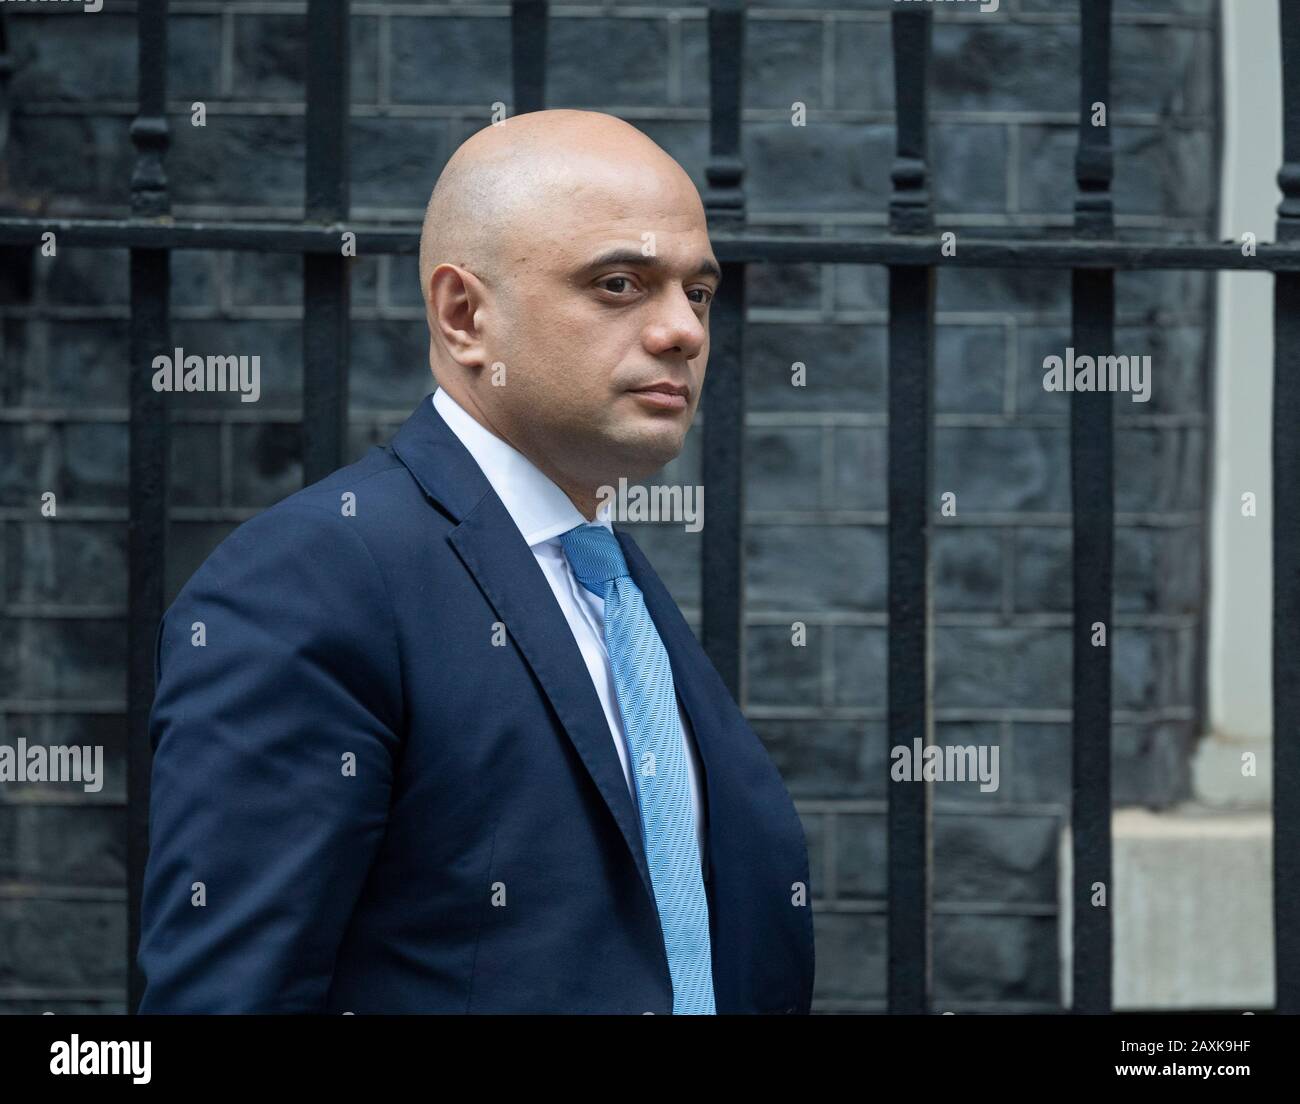 11 Downing Street, London, UK. 12th February 2020. Sajid Javid, Chancellor of the Exchequer, leaves 11 Downing Street minutes before the PM leaves No10 to attend weekly Prime Ministers Questions in Parliament. On 13th February (day following the photograph capture) Sajid Javid resigns as Chancellor during a Cabinet Reshuffle. Credit: Malcolm Park/Alamy. Stock Photo